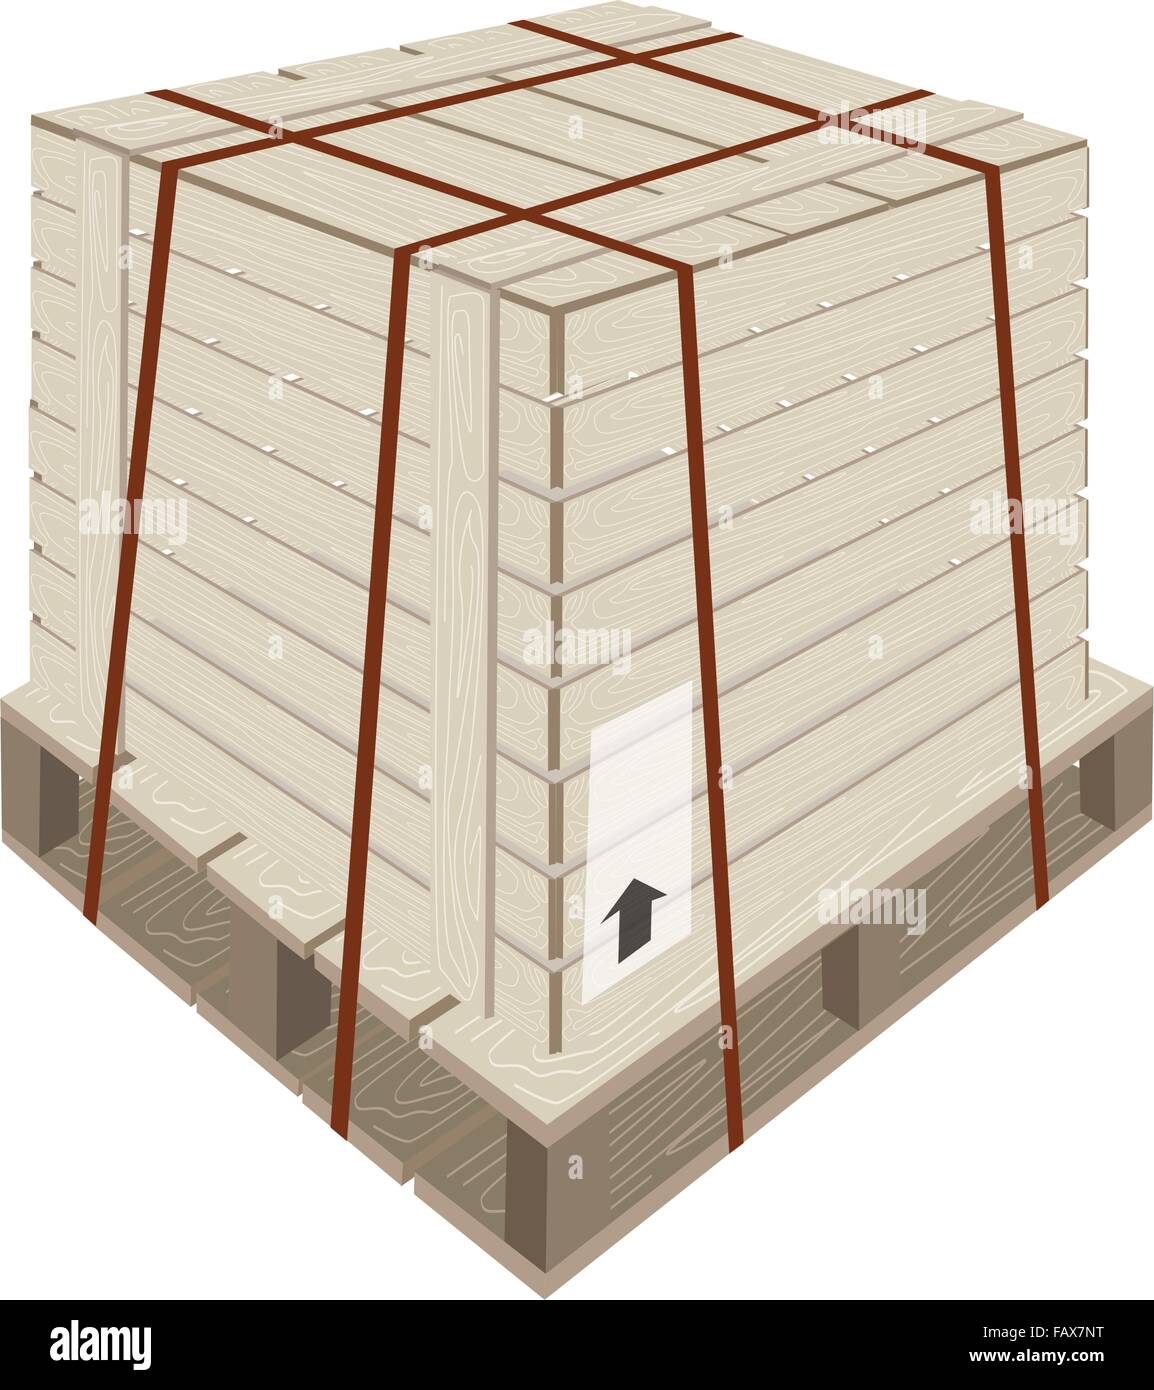 An Illustration Wooden Crate or Cargo Box with Steel Banding on A Wooden Pallet, For Secure Cargo Transportation. Stock Vector